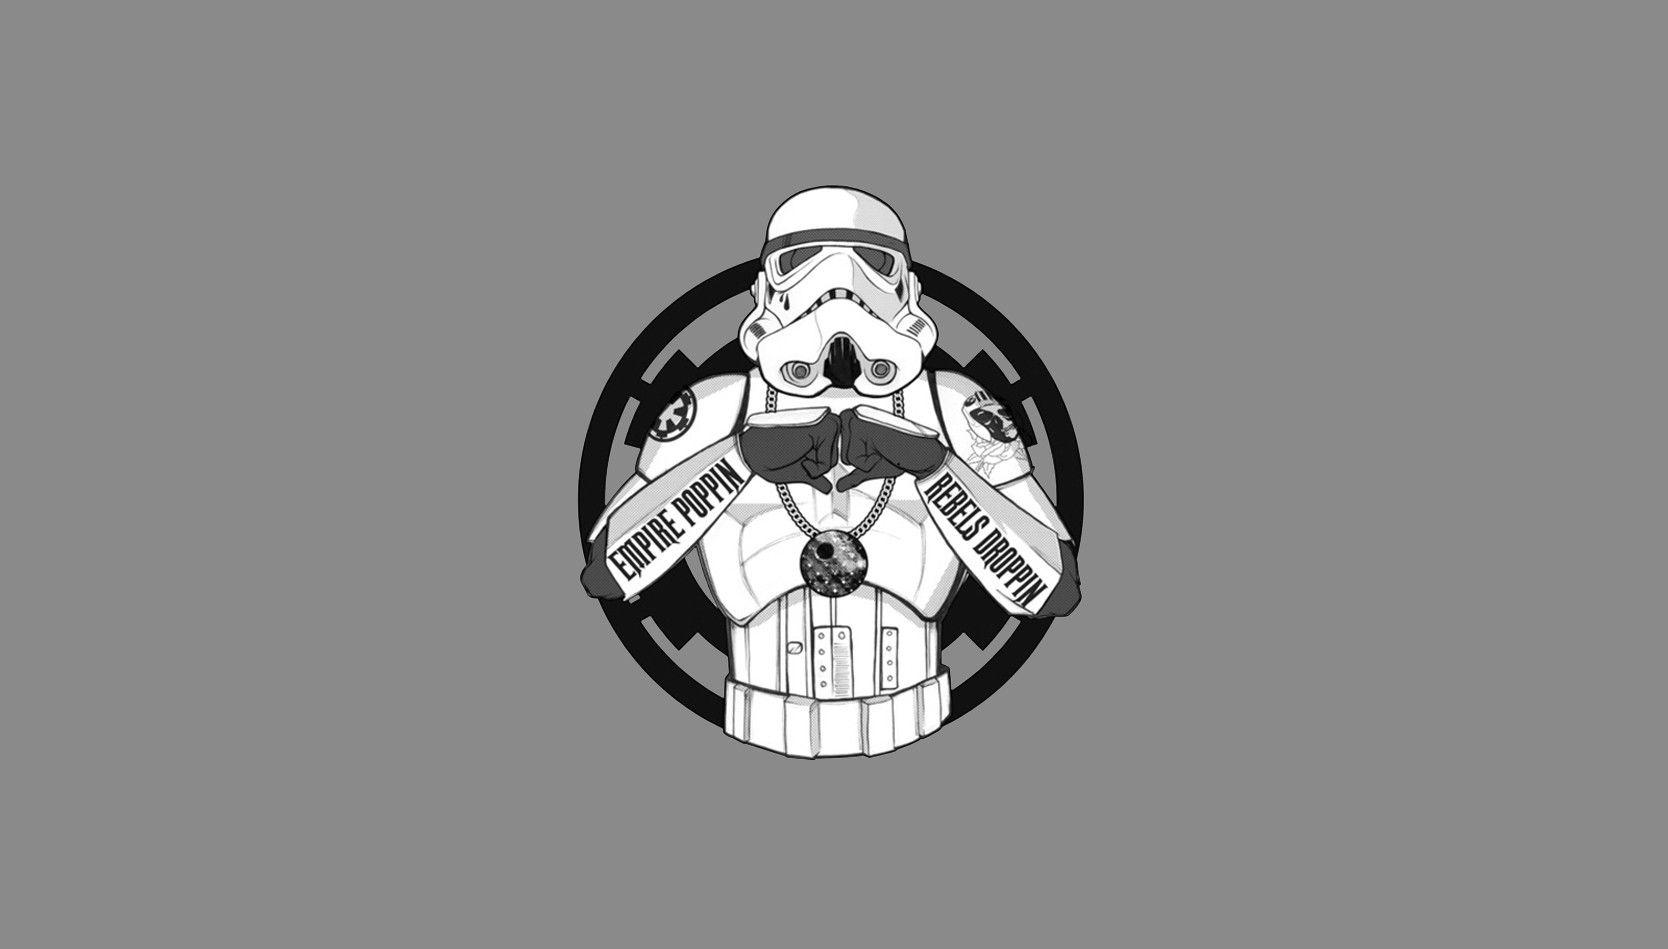 Star Wars, minimalistic, stormtroopers, artwork, The Empire